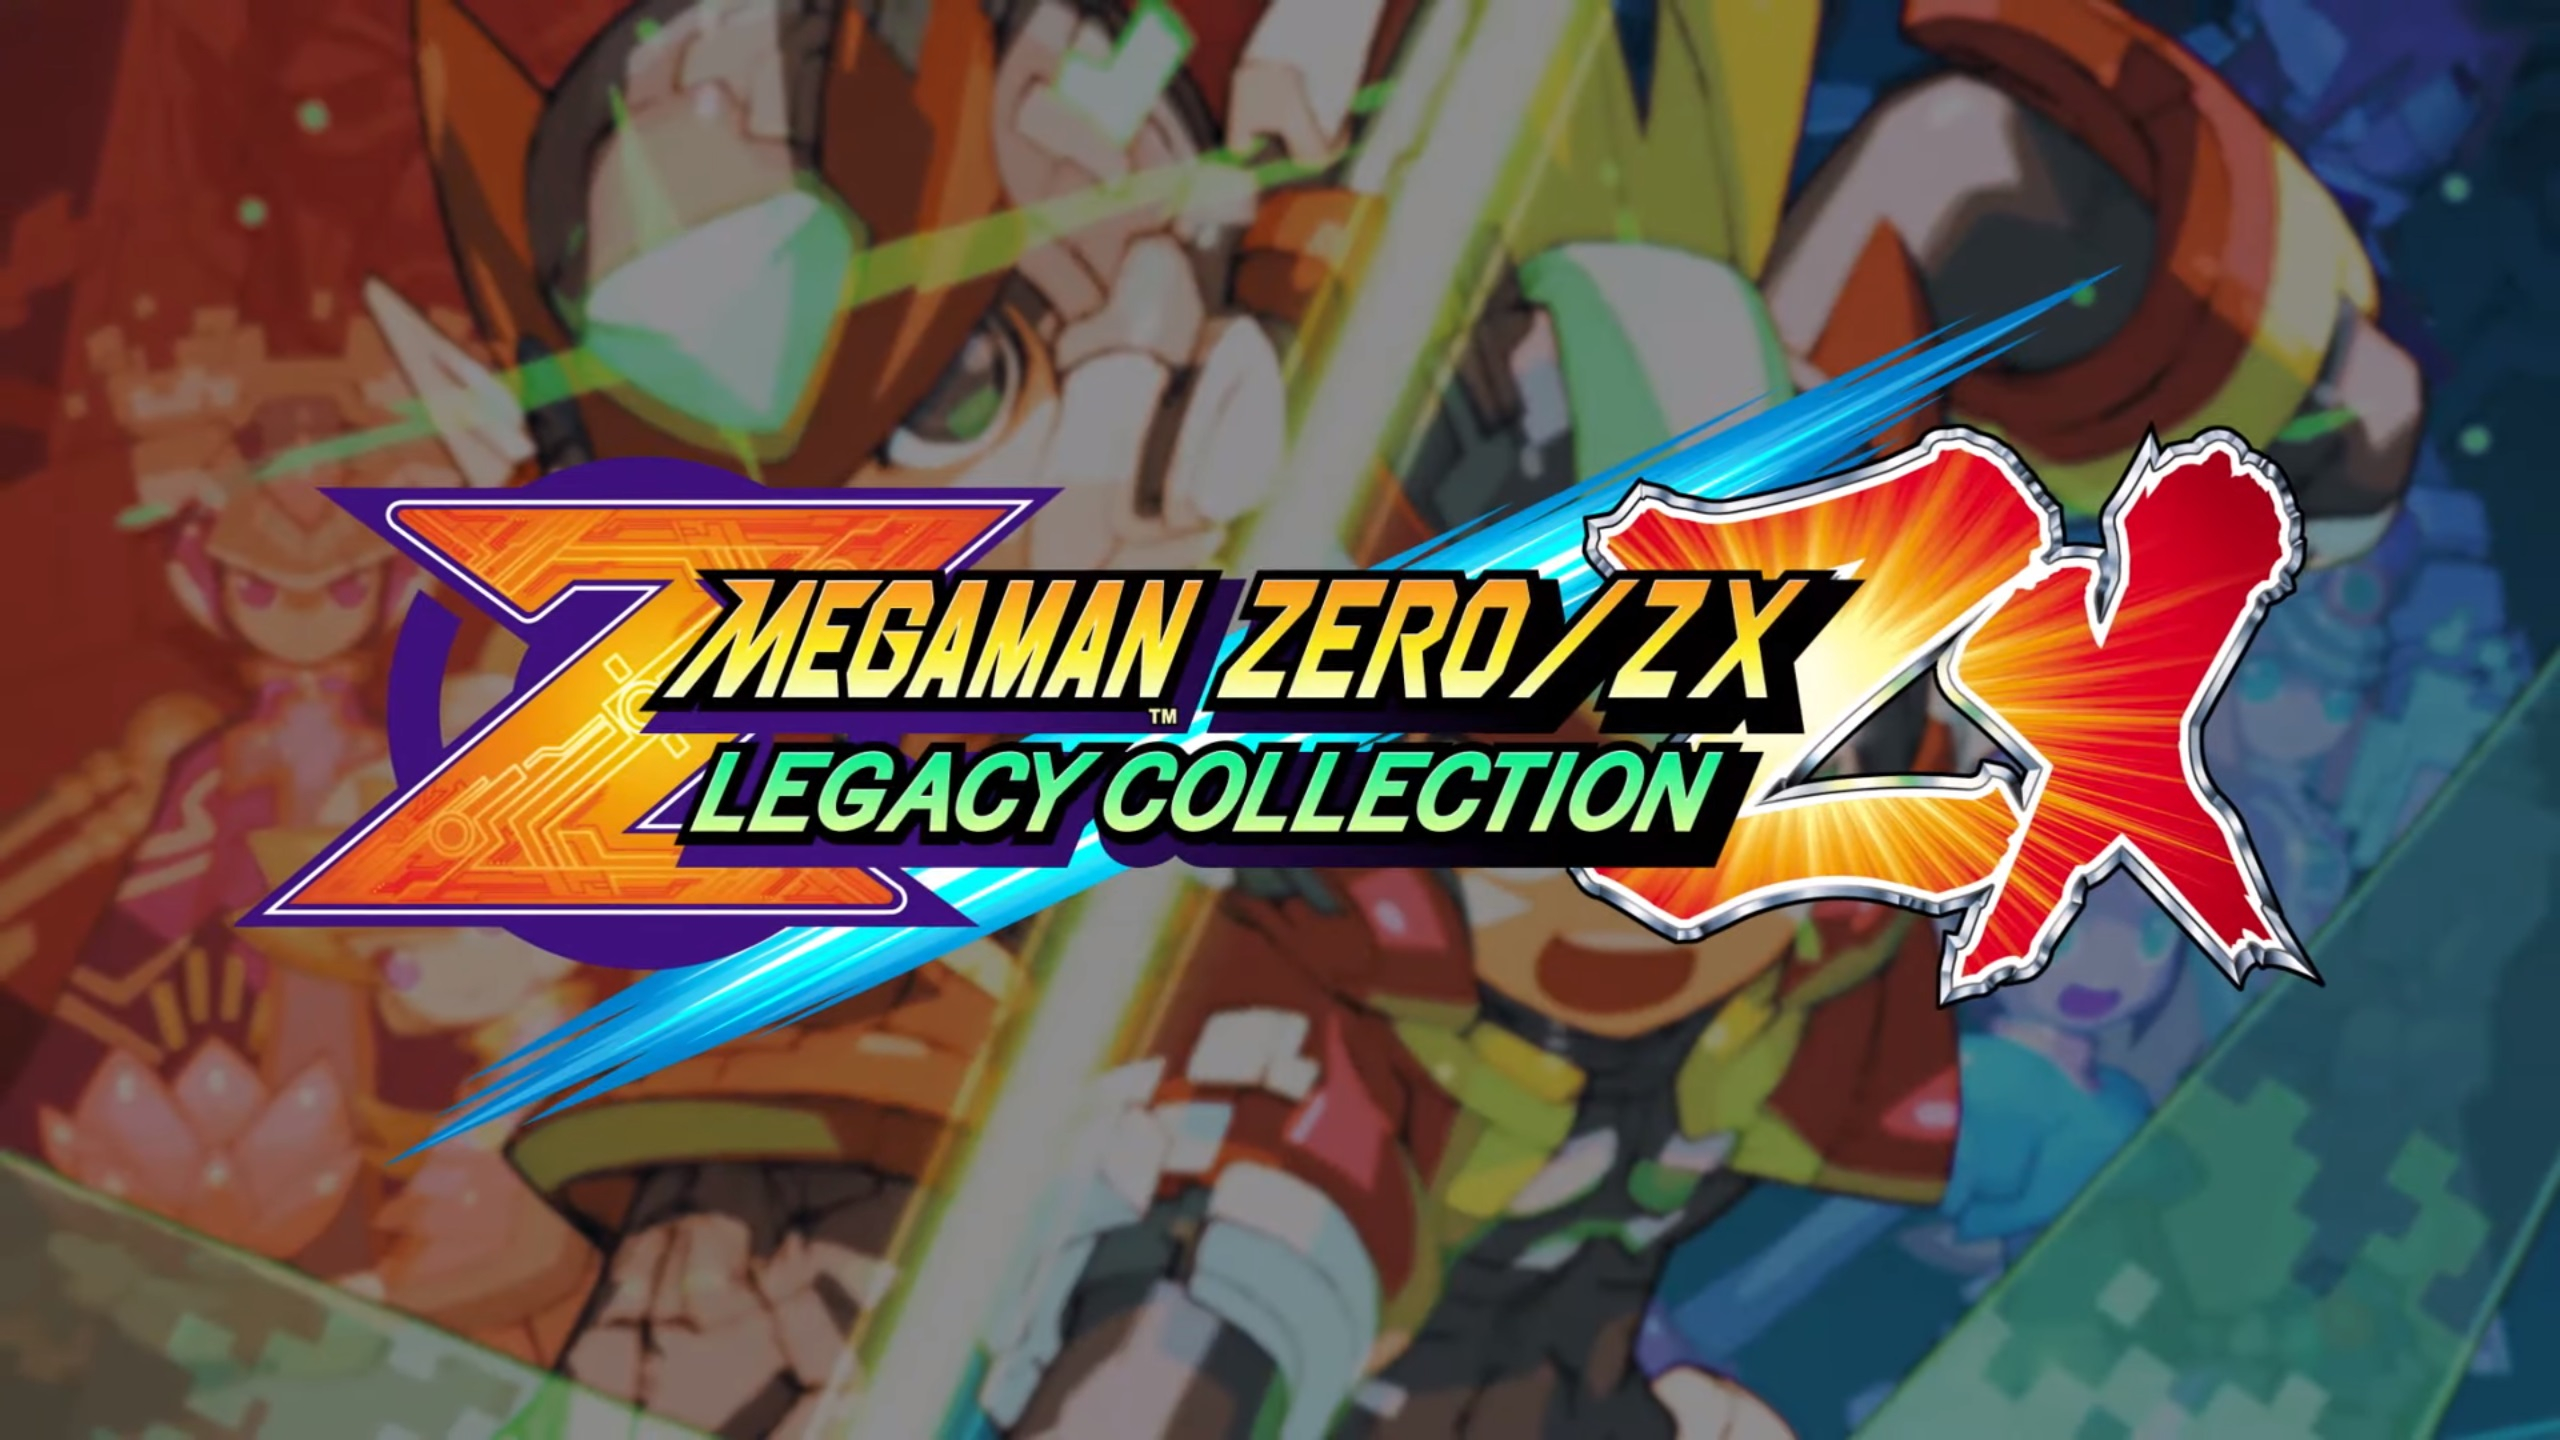 Mega Man Zero/ZX Legacy Collection Wallpapers - Wallpaper Cave.